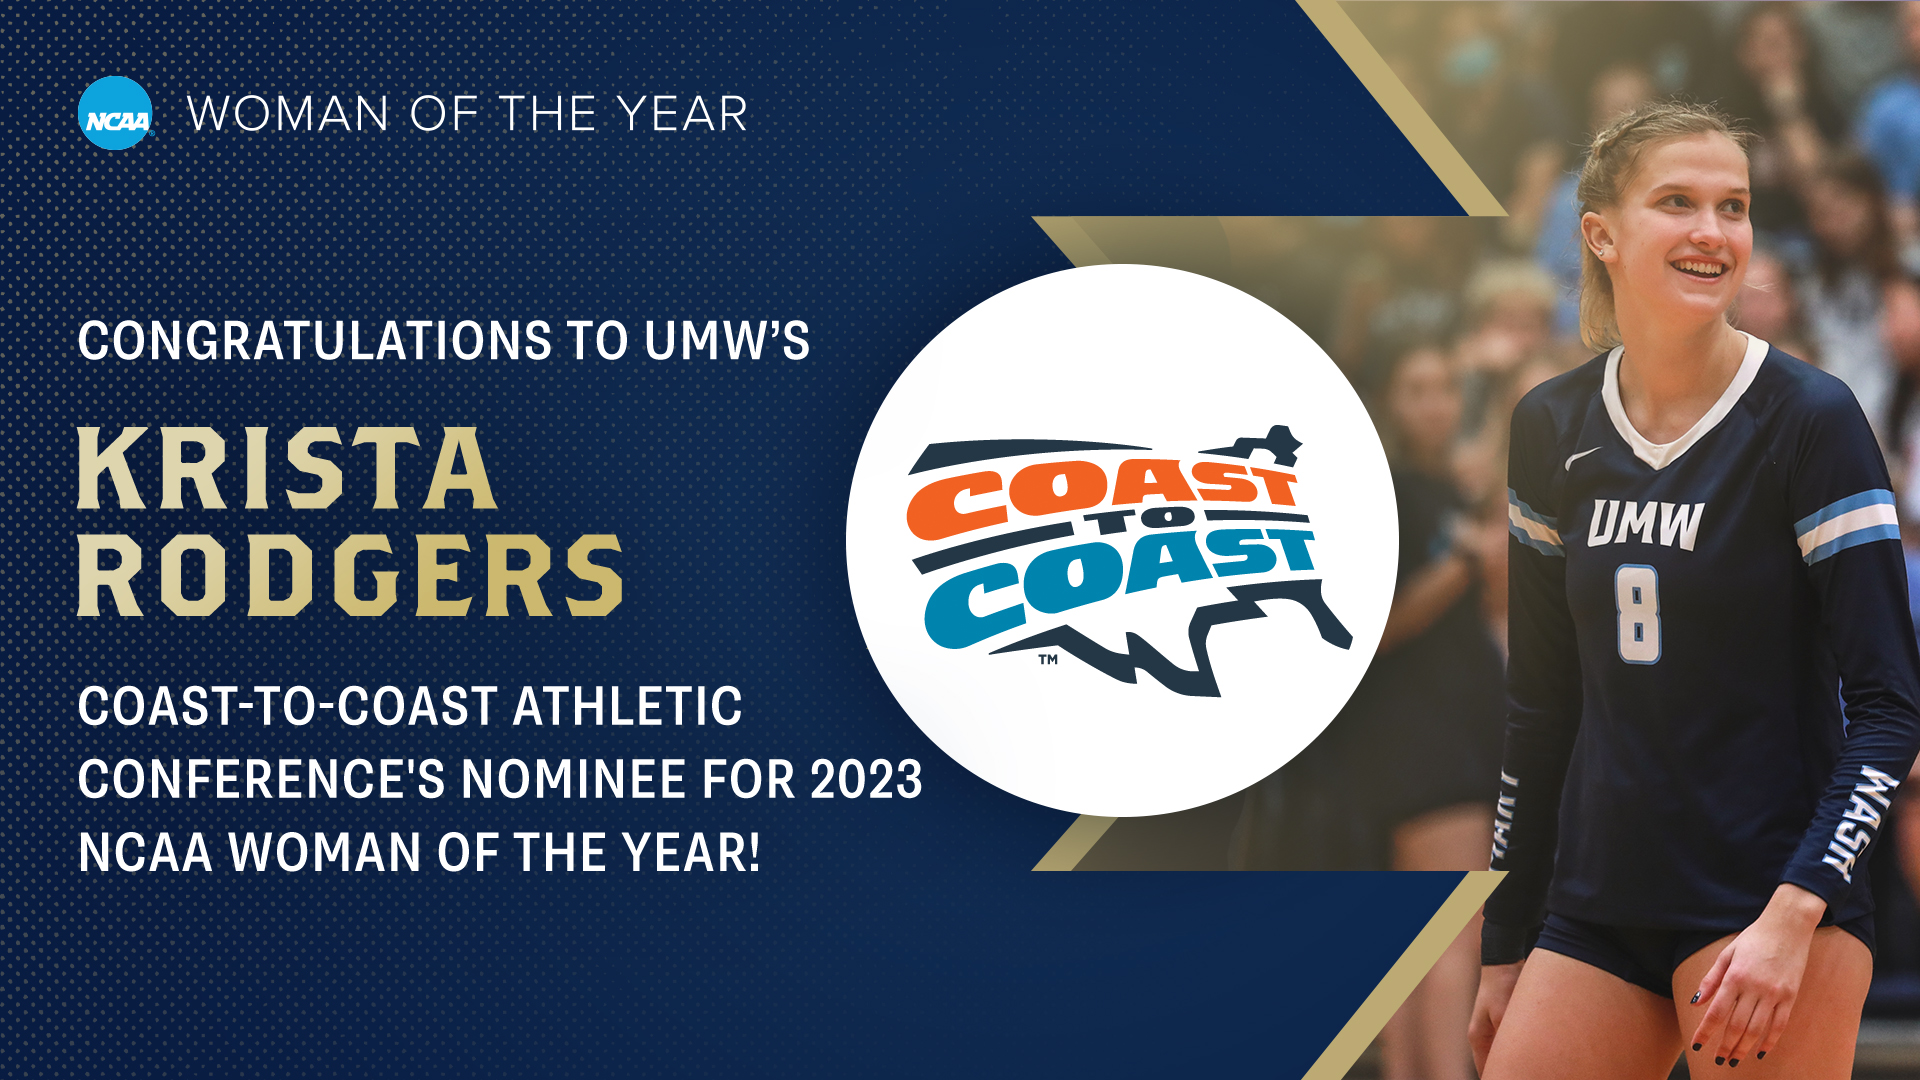 UMW’s Krista Rodgers nominated for 2023 NCAA Woman of the Year